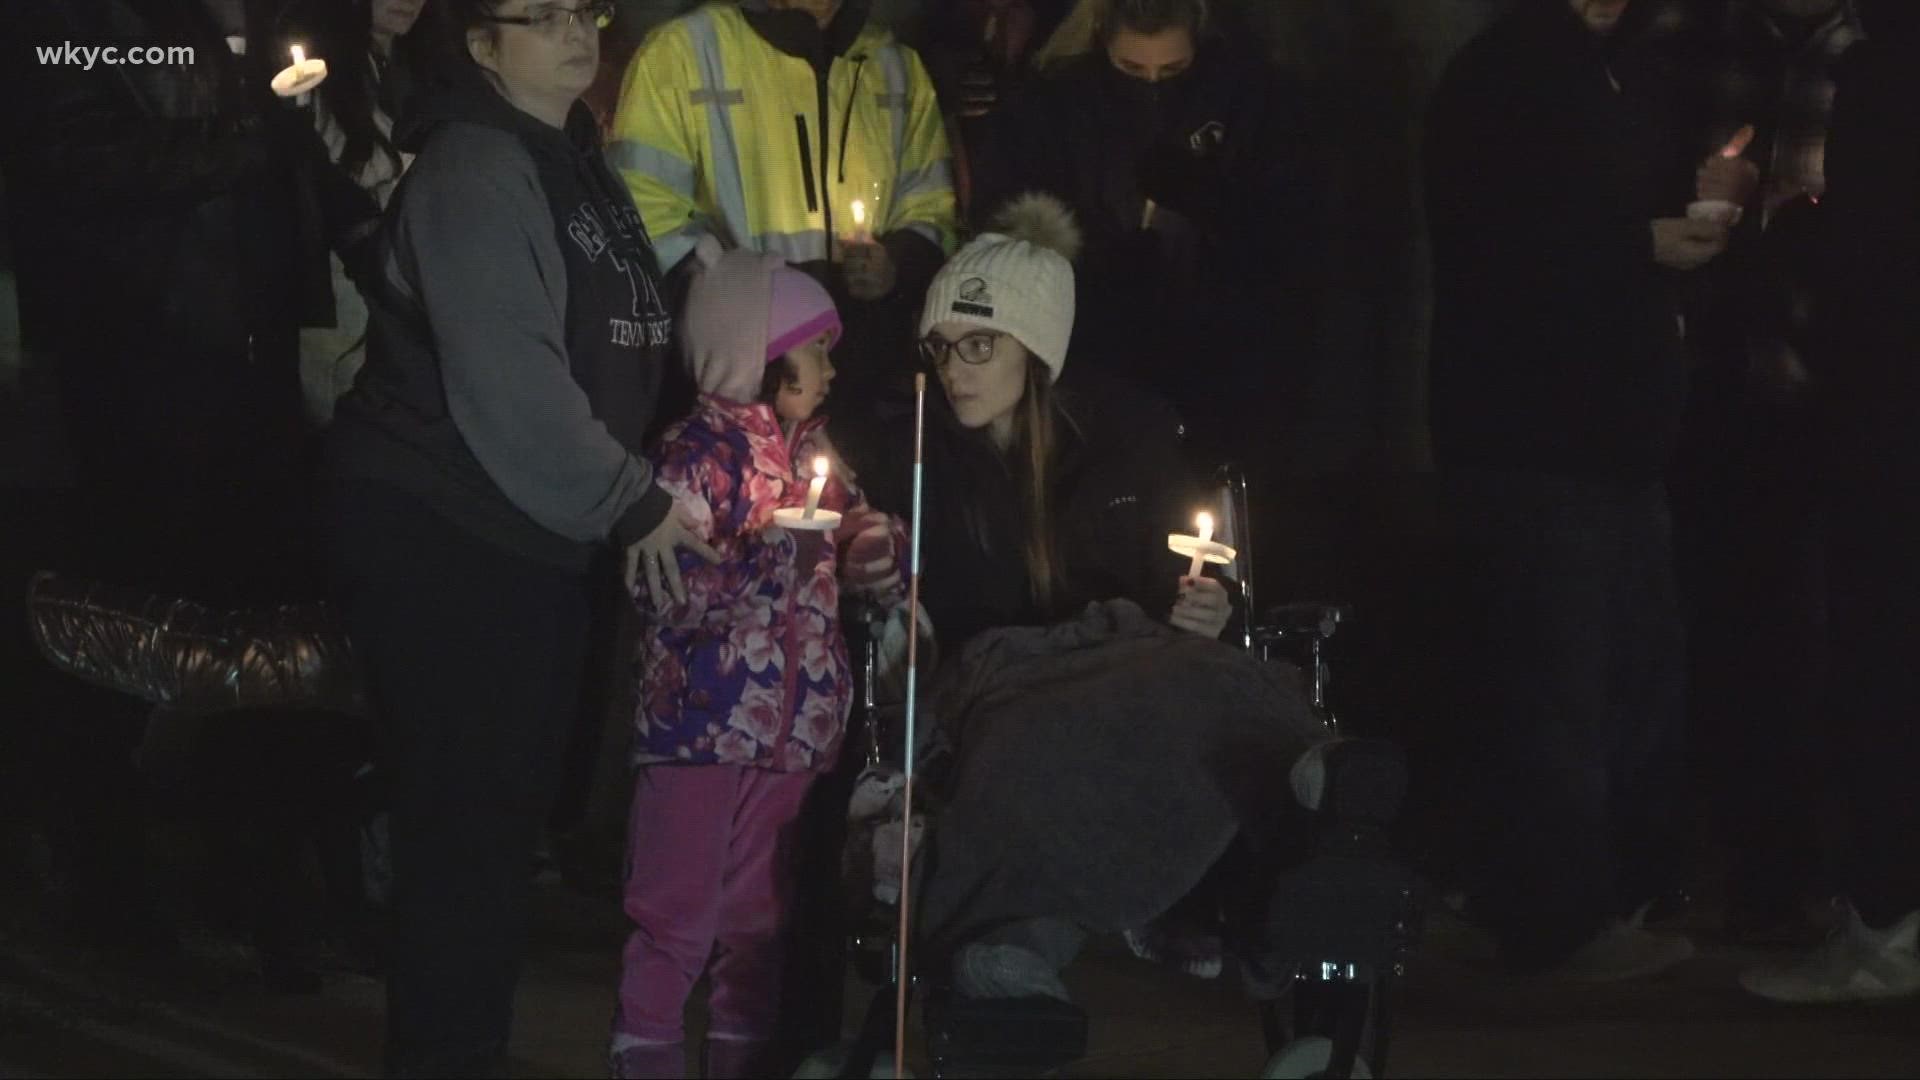 The Brook Park community braved the cold and came together Saturday night. A vigil was held for the infant girl who was recently shot and killed in a murder-suicide.